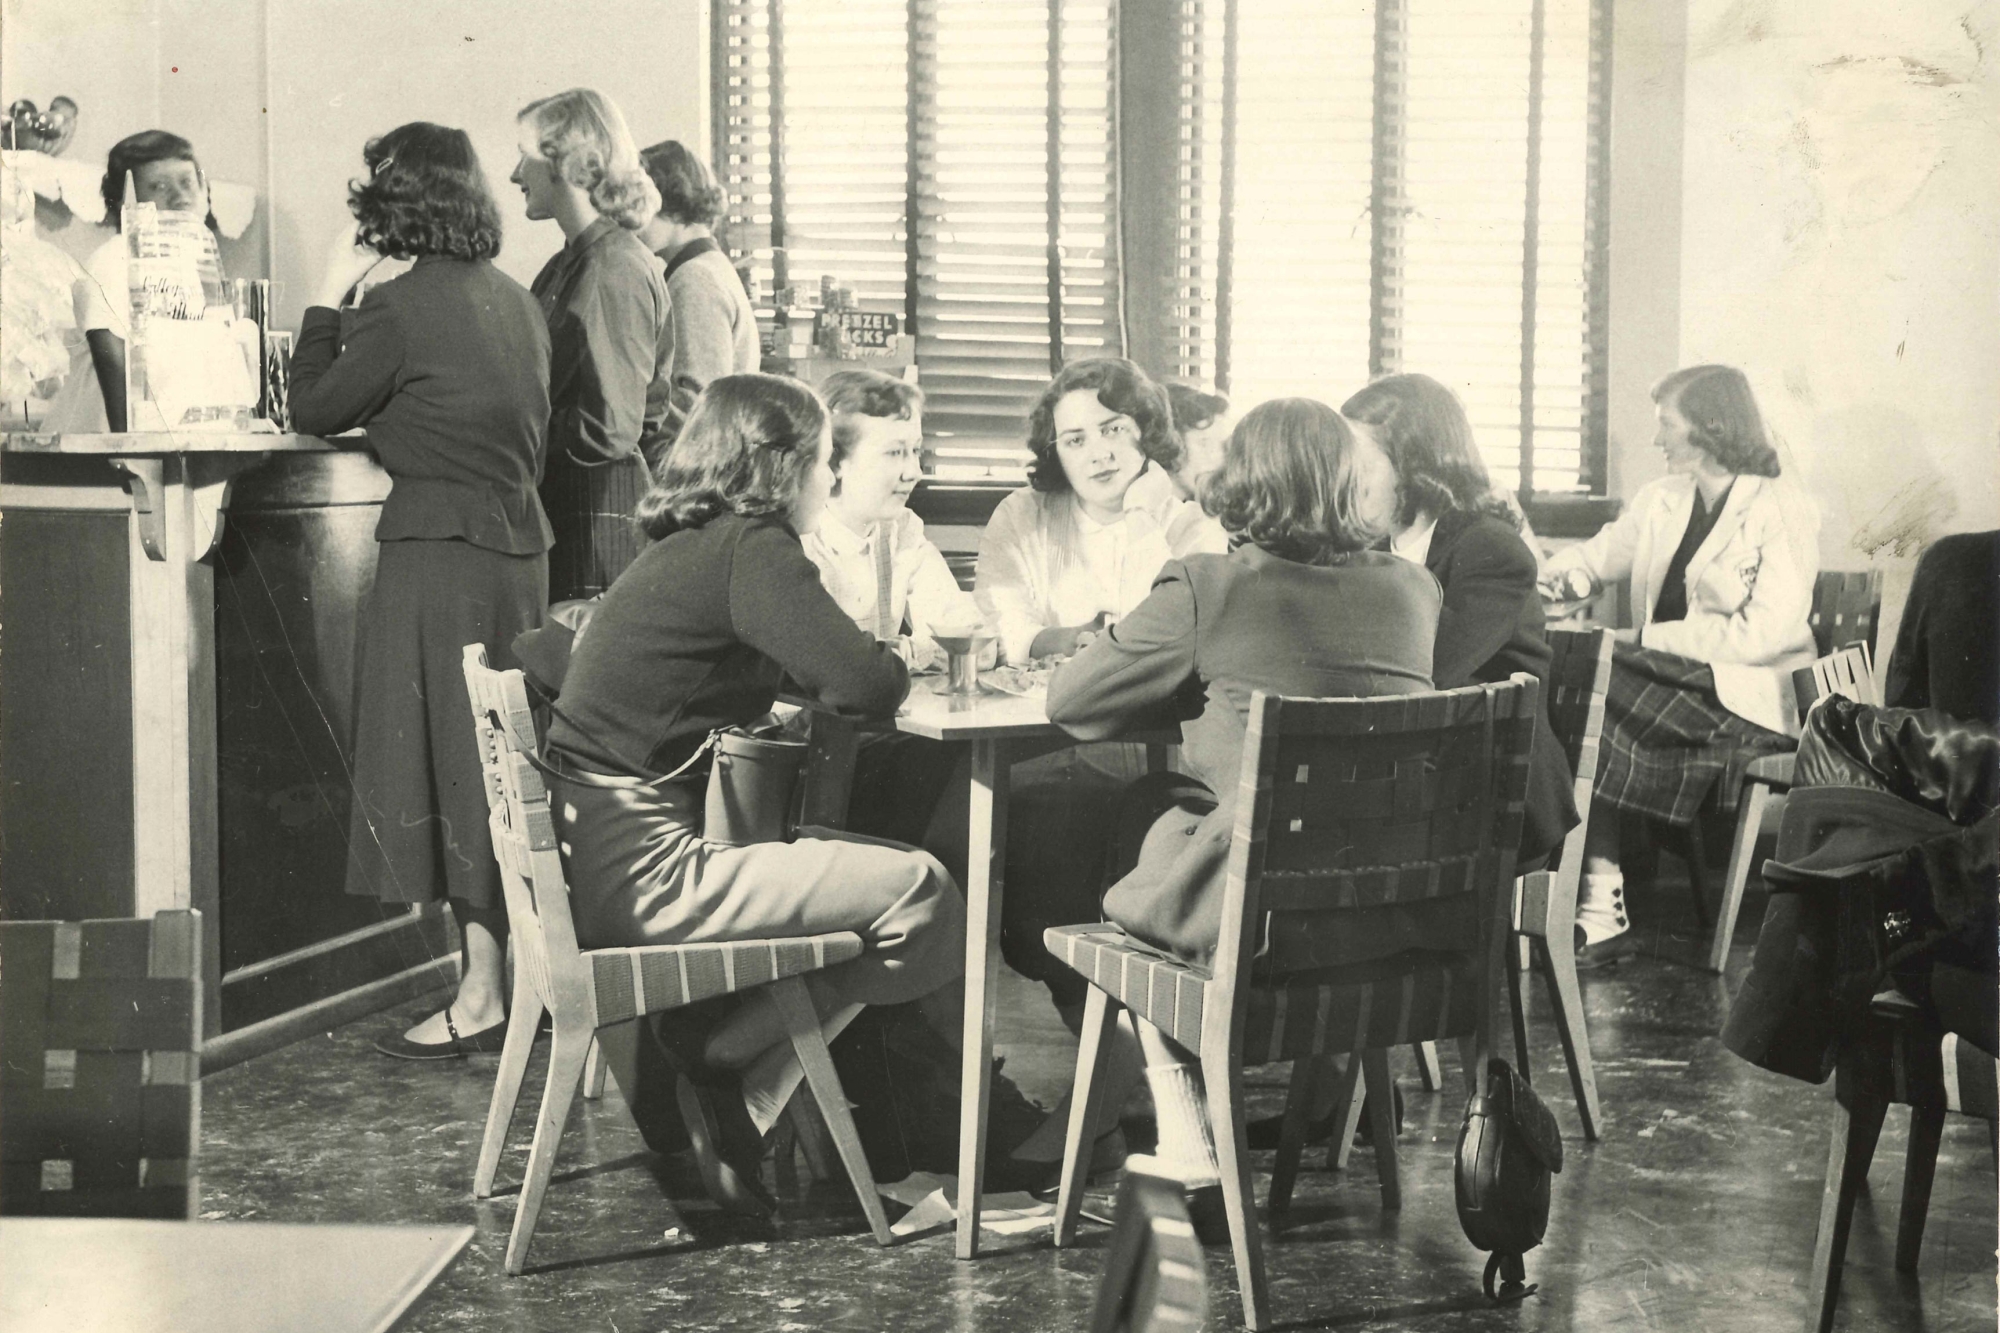 a group of women sitting at a table at a soda fountain. Behind them, a few others stand at a countertop, as well as a couple of people seated.